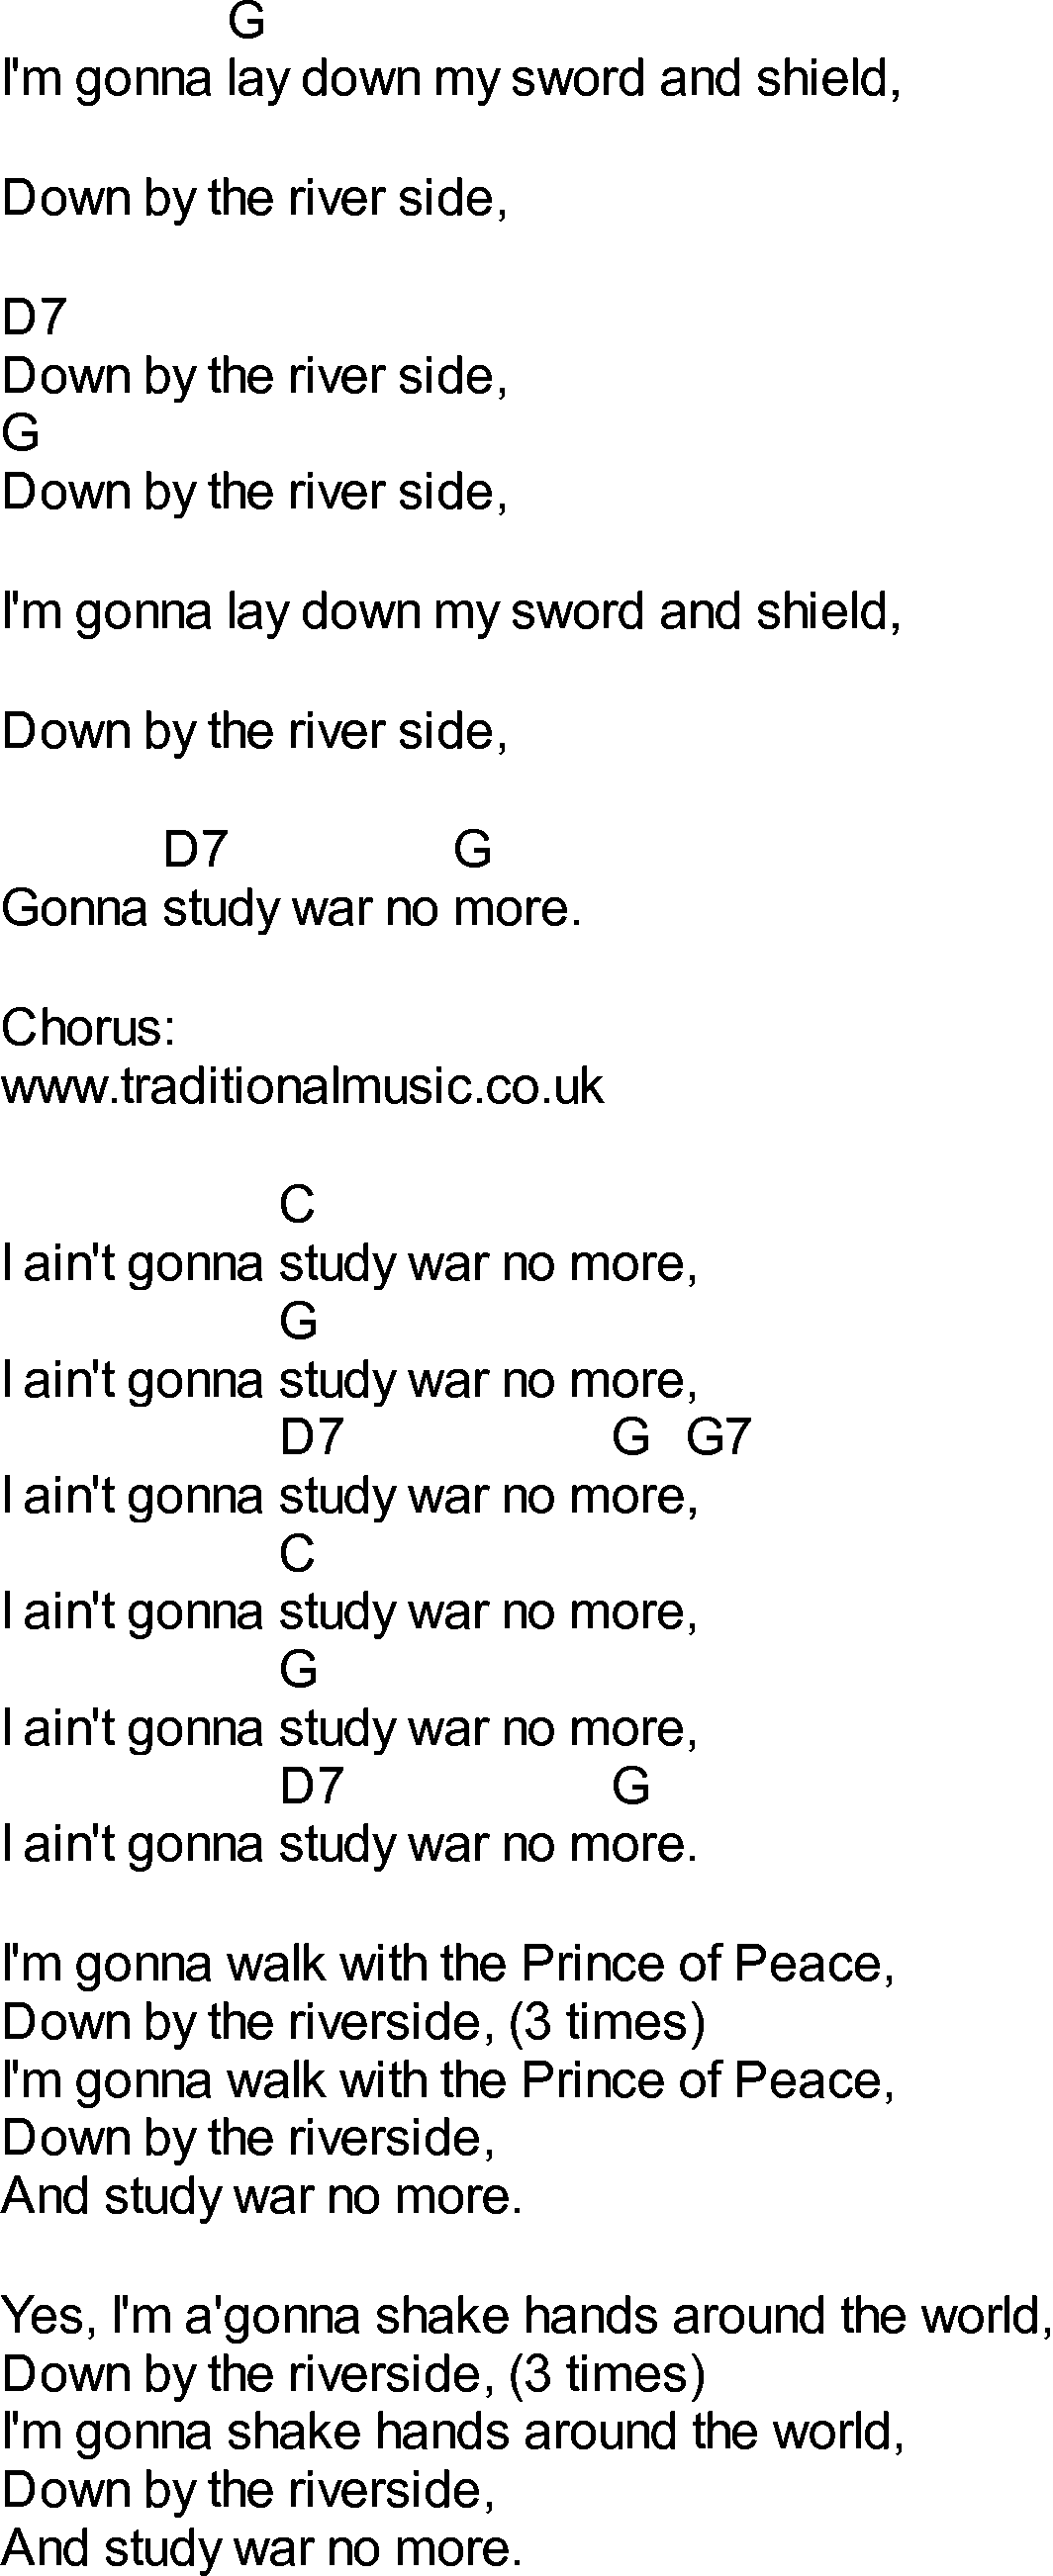 Bluegrass songs with chords - Study War No More